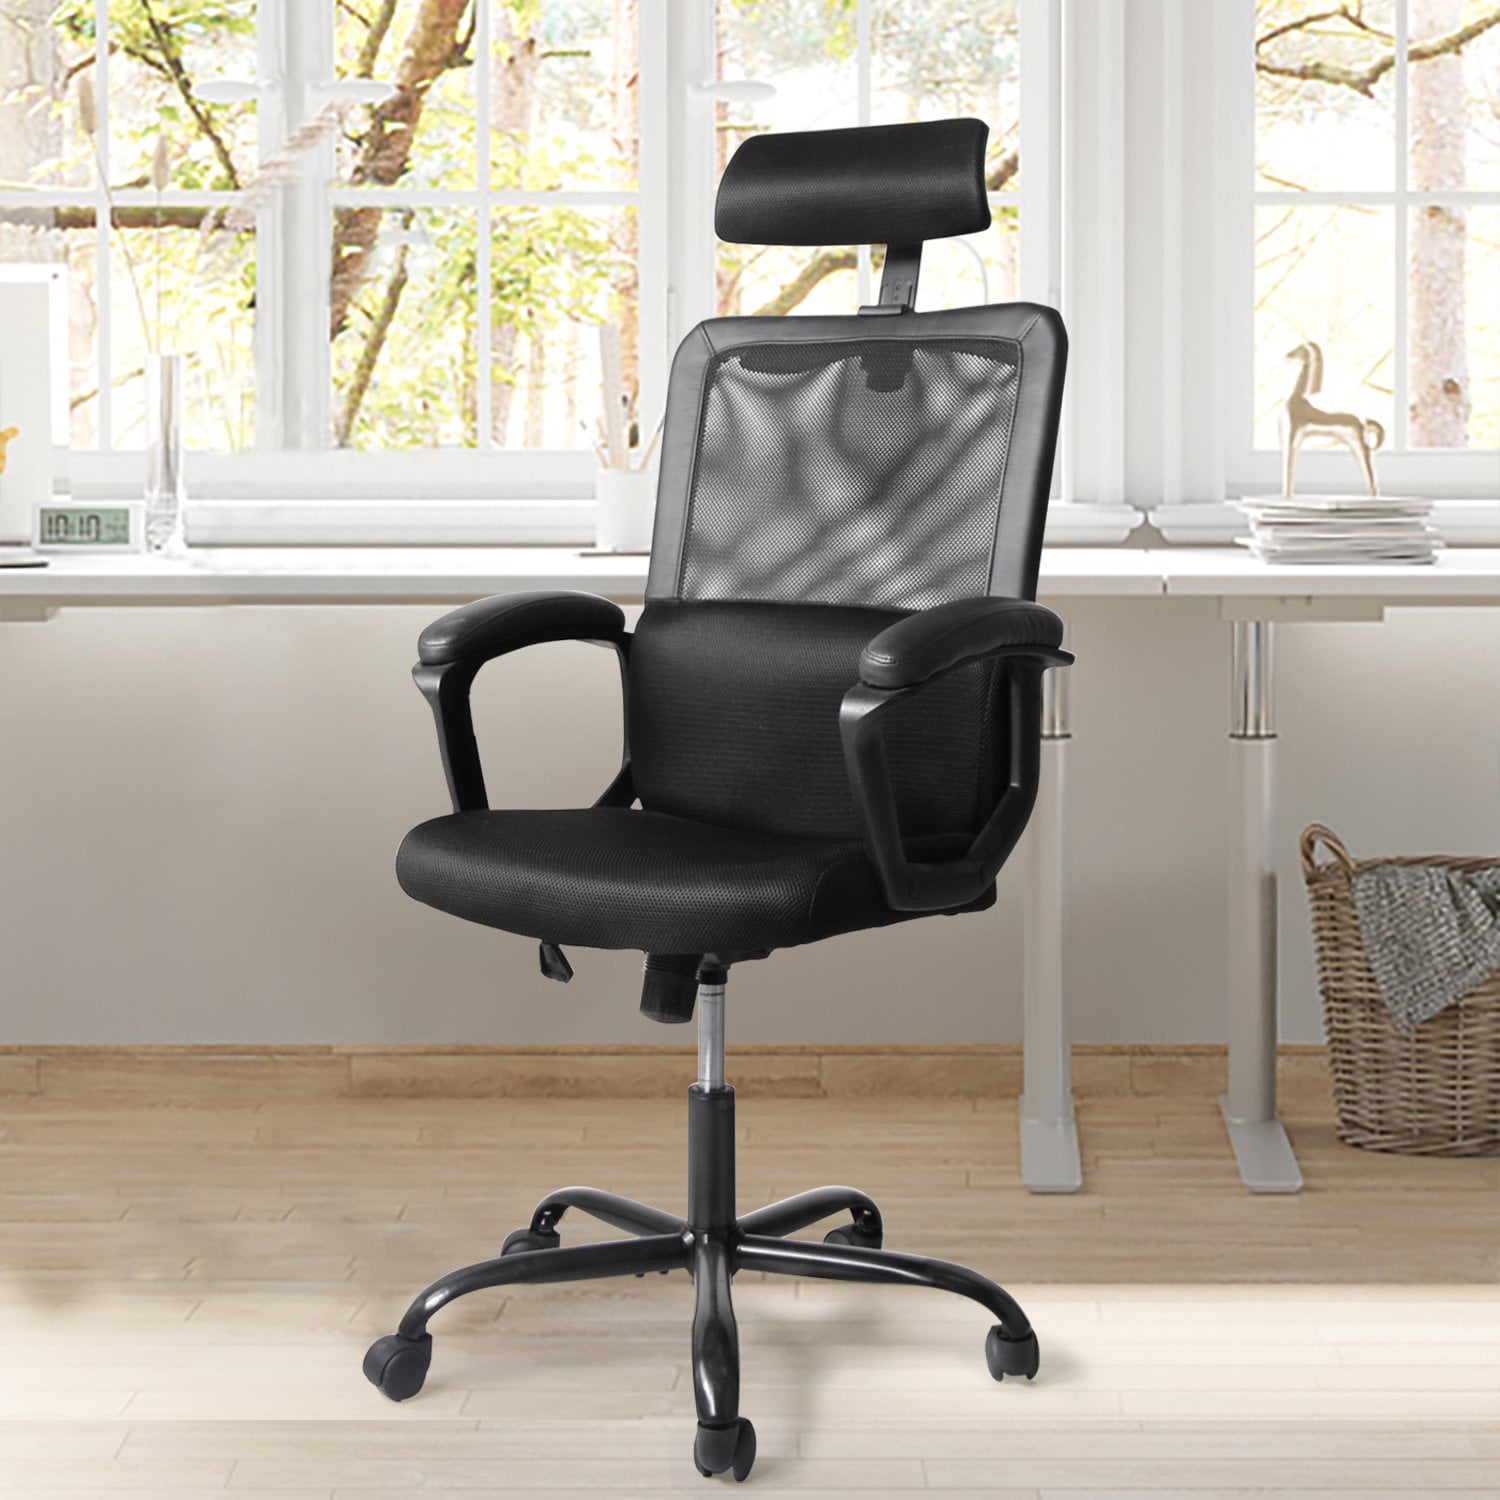 Black Office Chair Big Tall Manager Mesh Desk Furniture Heavy Duty 300LB Max 